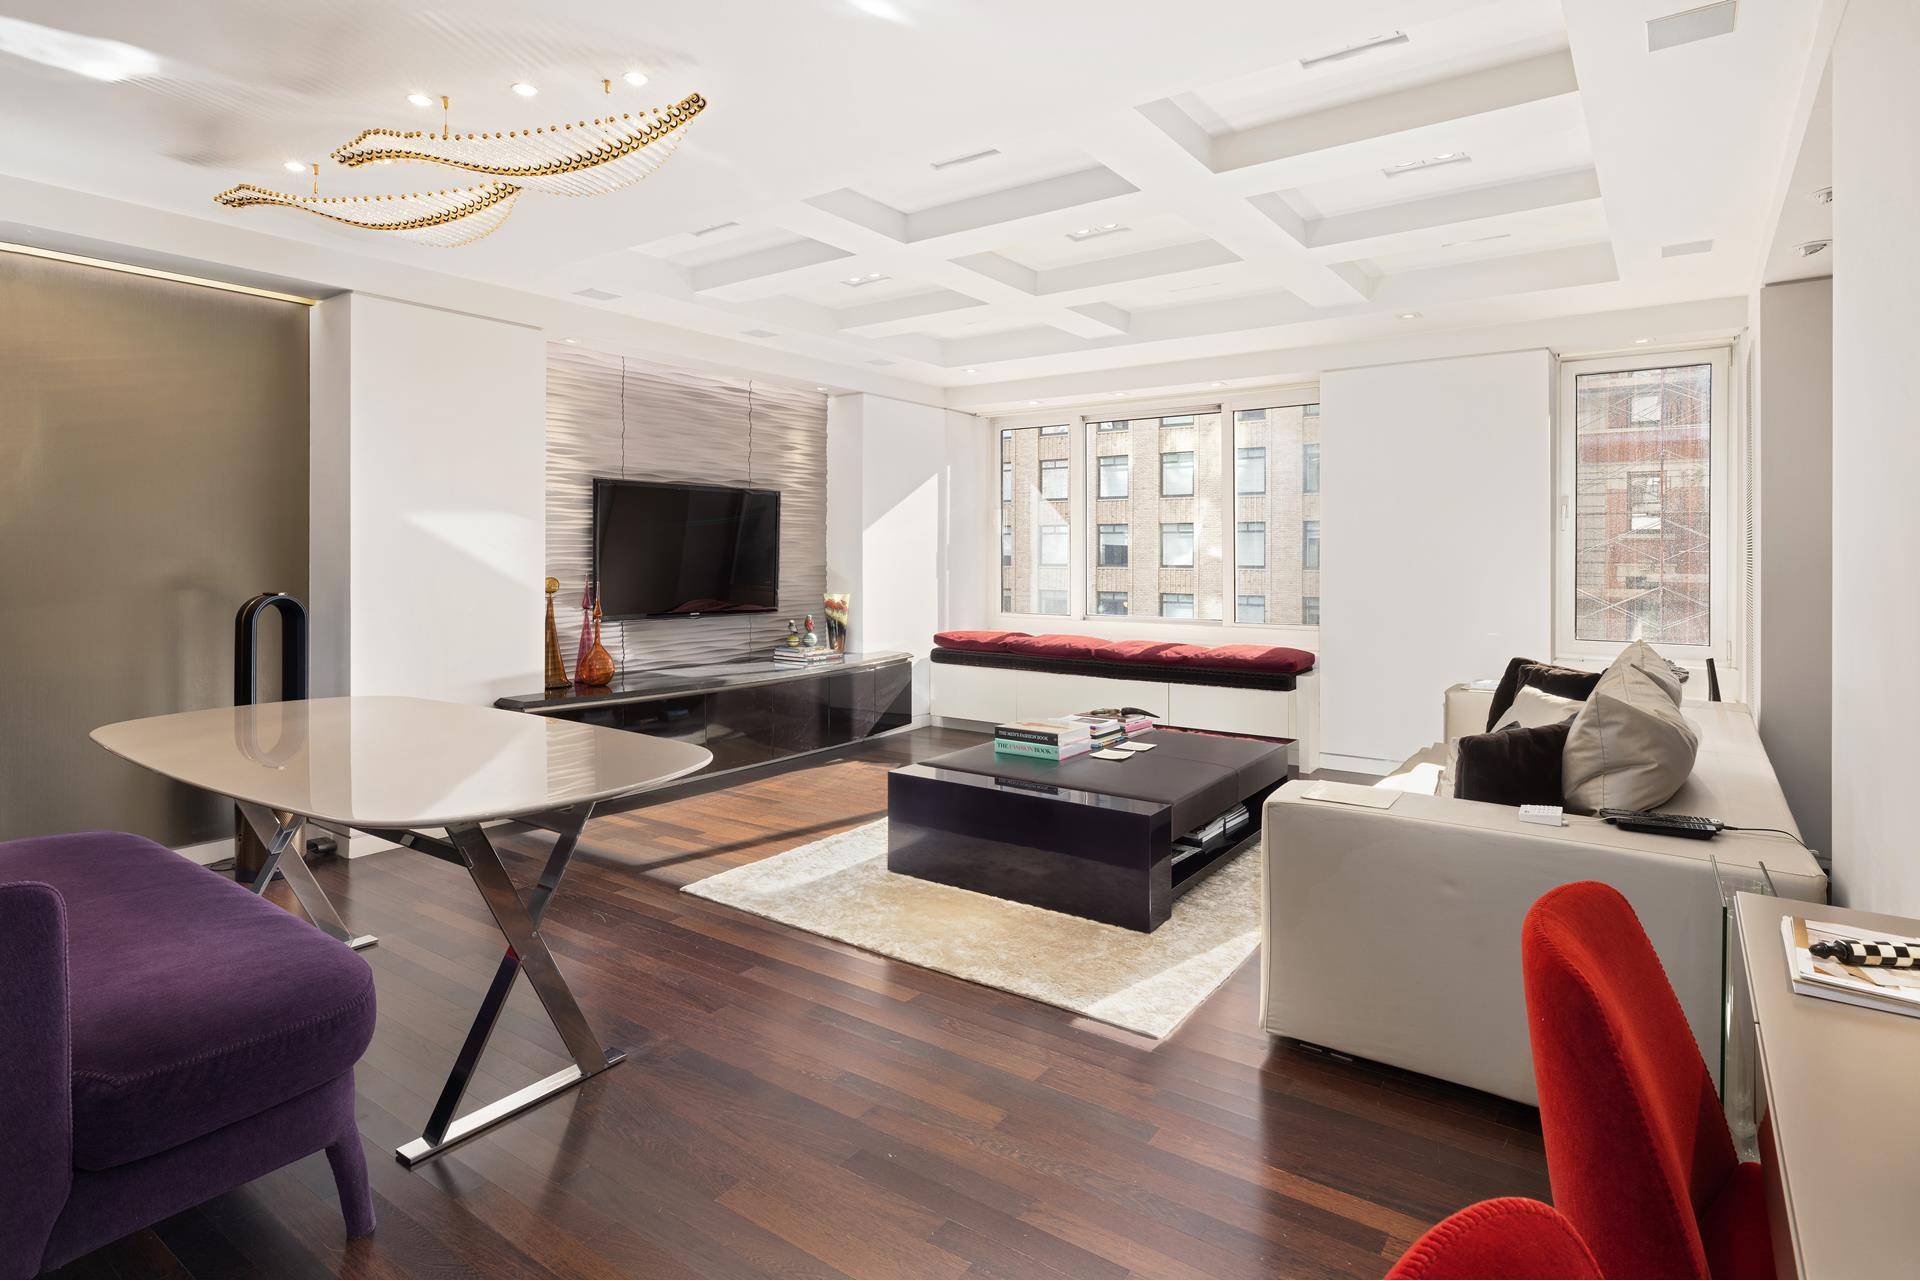 Welcome Home to this turn key, meticulously renovated 2 bedroom 2 bath Condominium residence perfectly located on one of New York City's most prestigious blocks Central Park South.